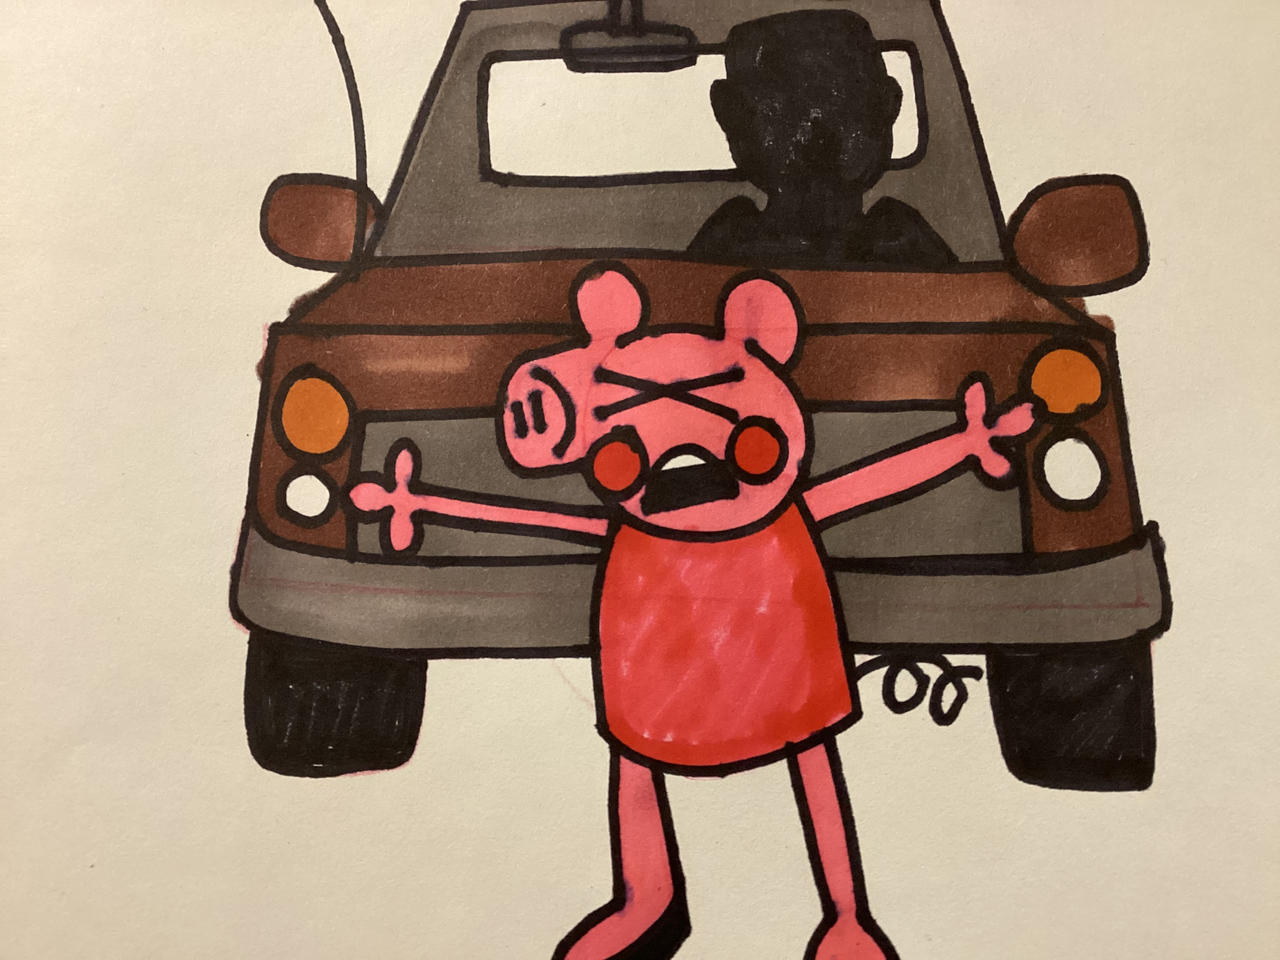 Day 1 of turning Piggy into Peppa Pig characters! by ItzQasim95 on  DeviantArt